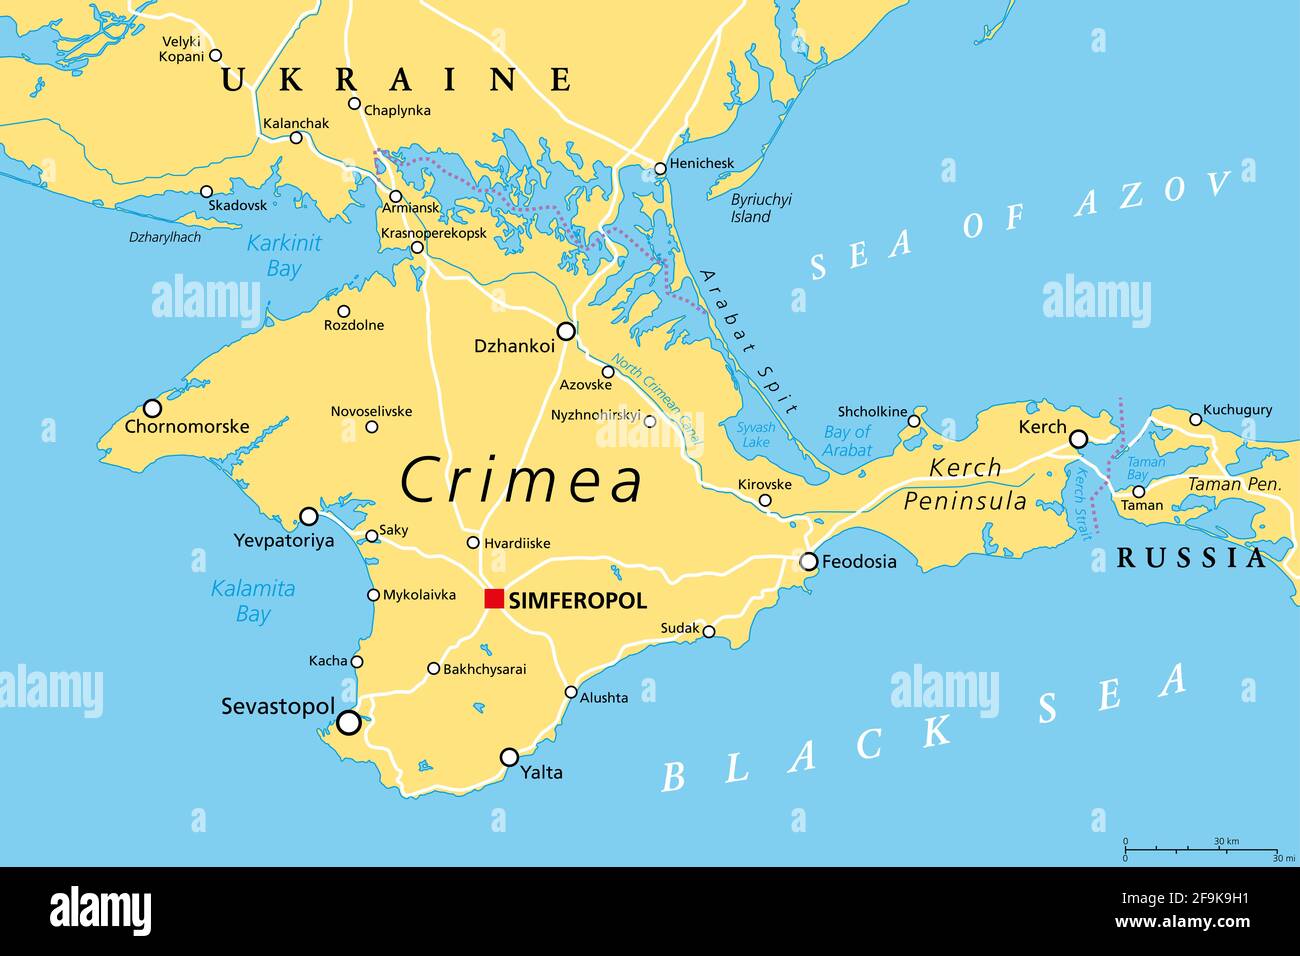 Crimea political map. Peninsula in Eastern Europe on the northern coast of the Black Sea, with disputed status. Controlled and governed by Russia. Stock Photo